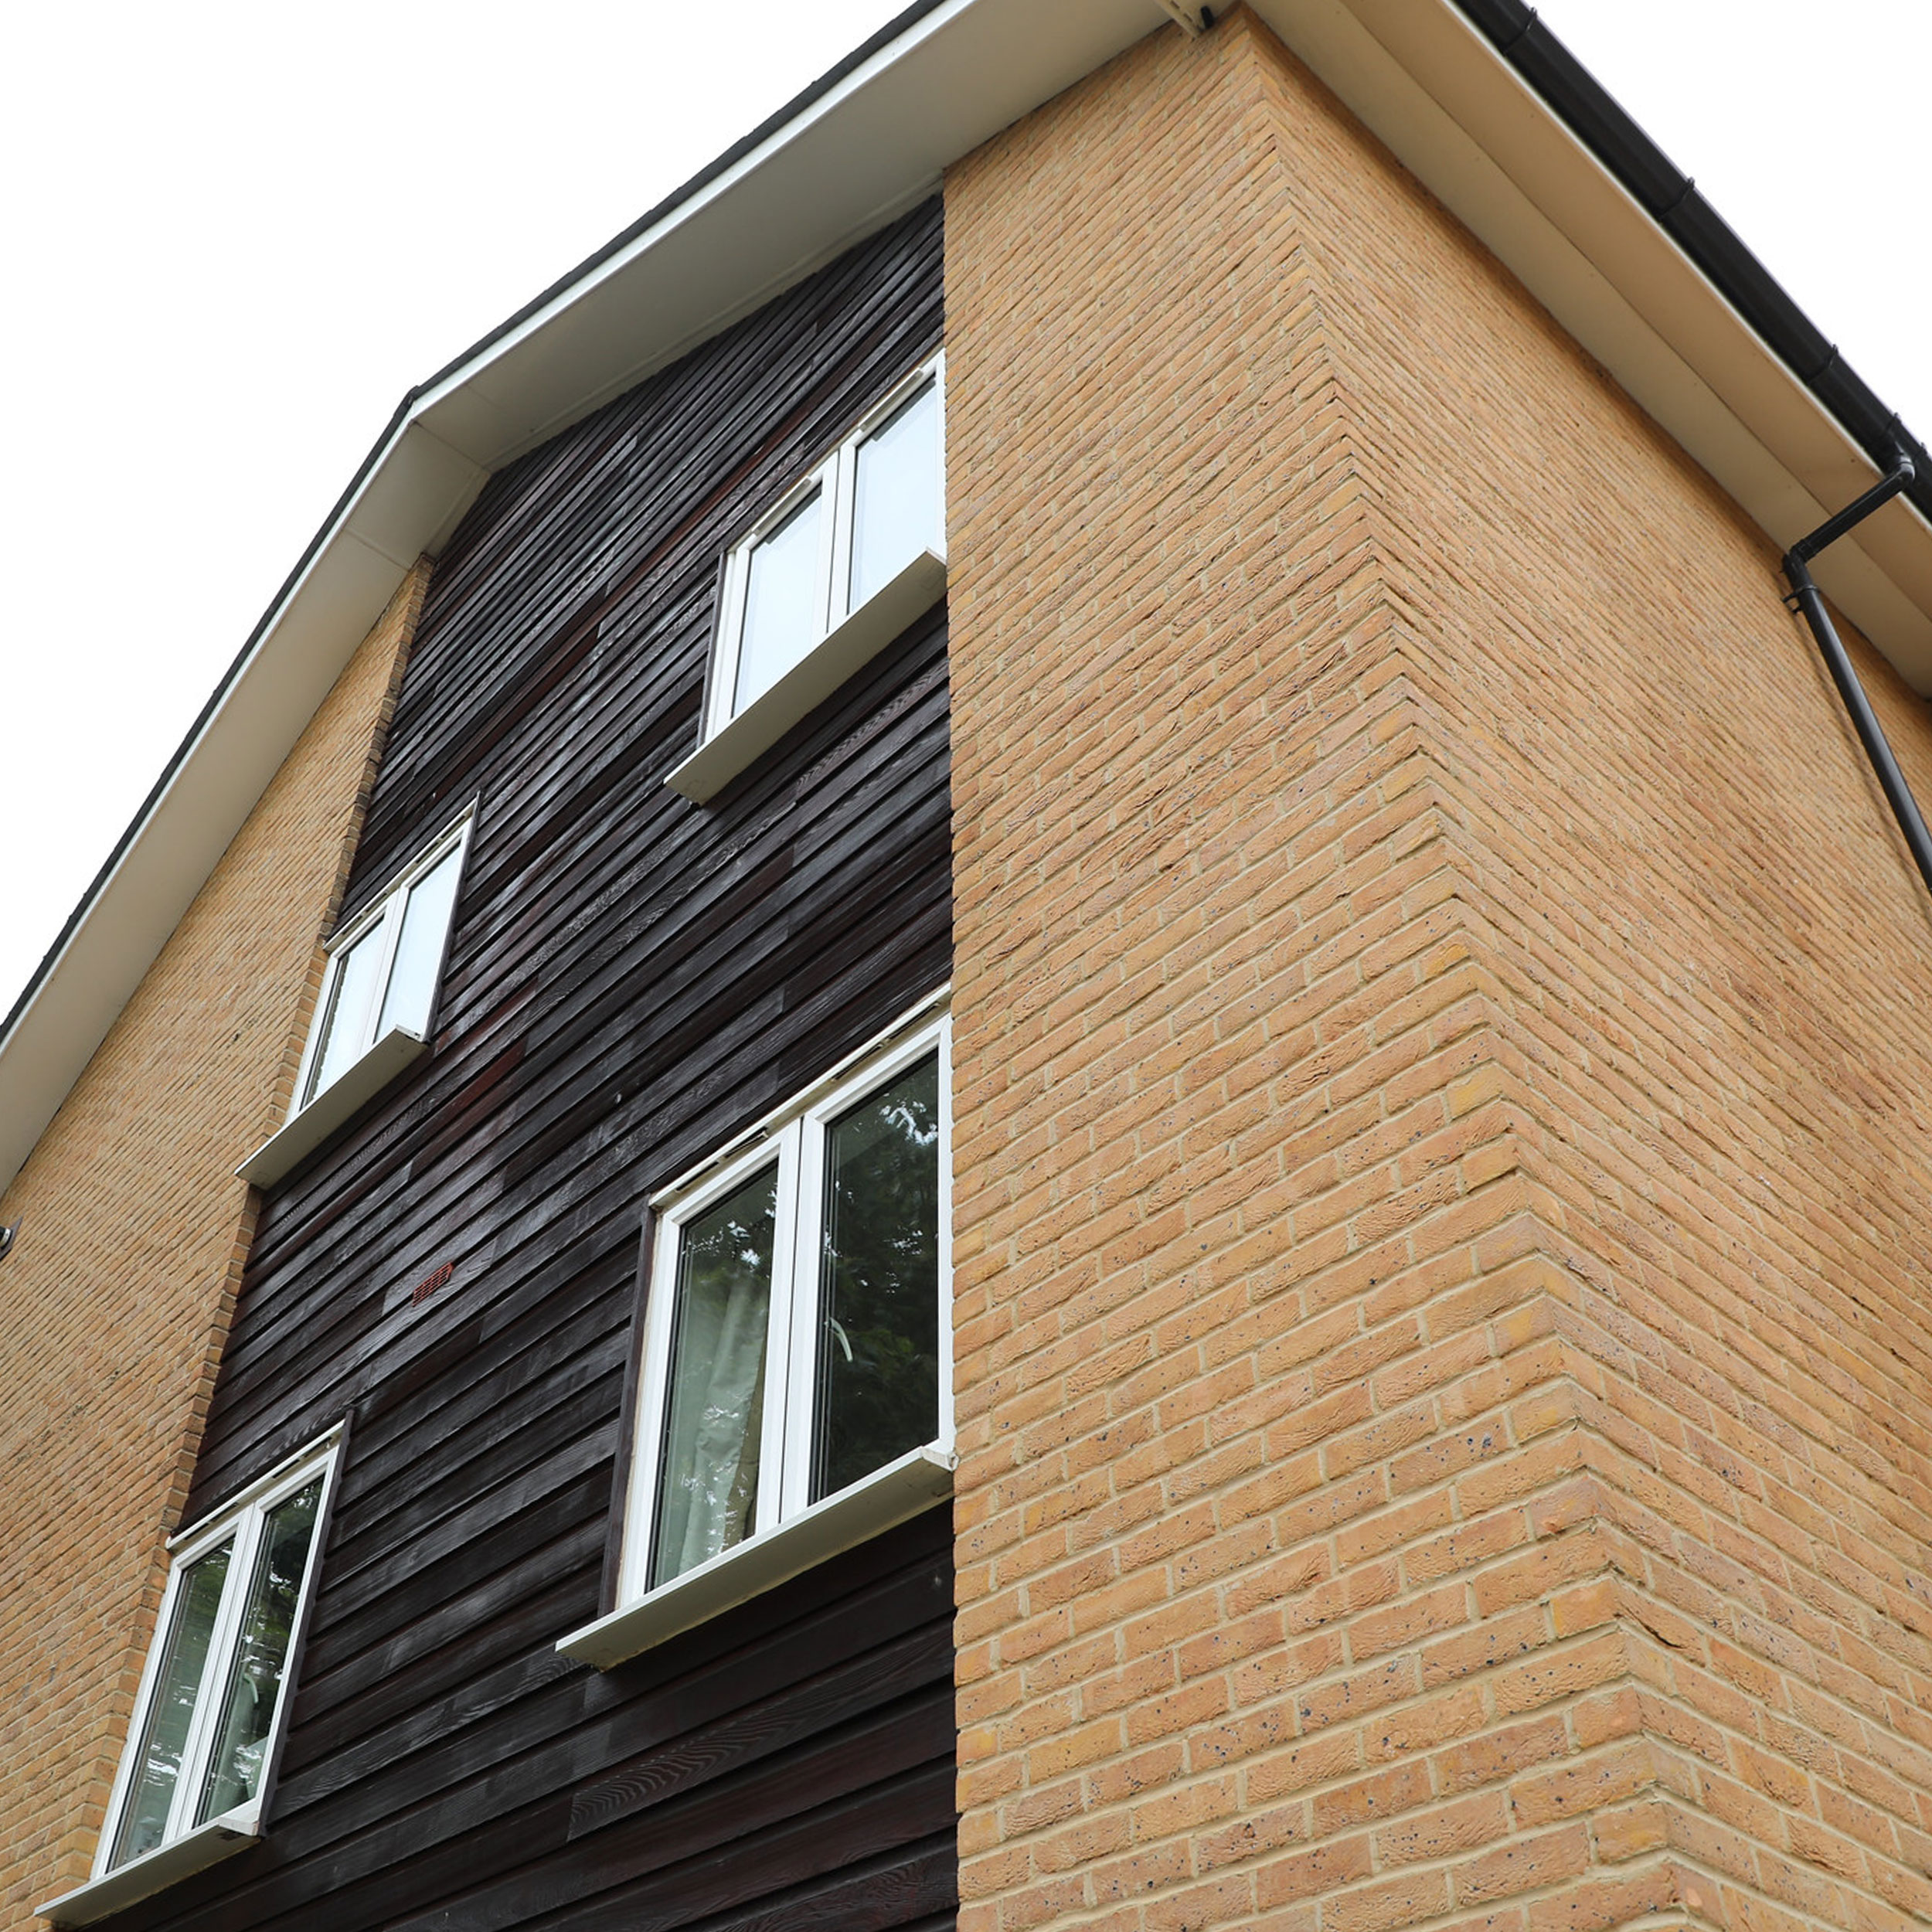 Minor repairs contract at Hengist way shows the façade of the property